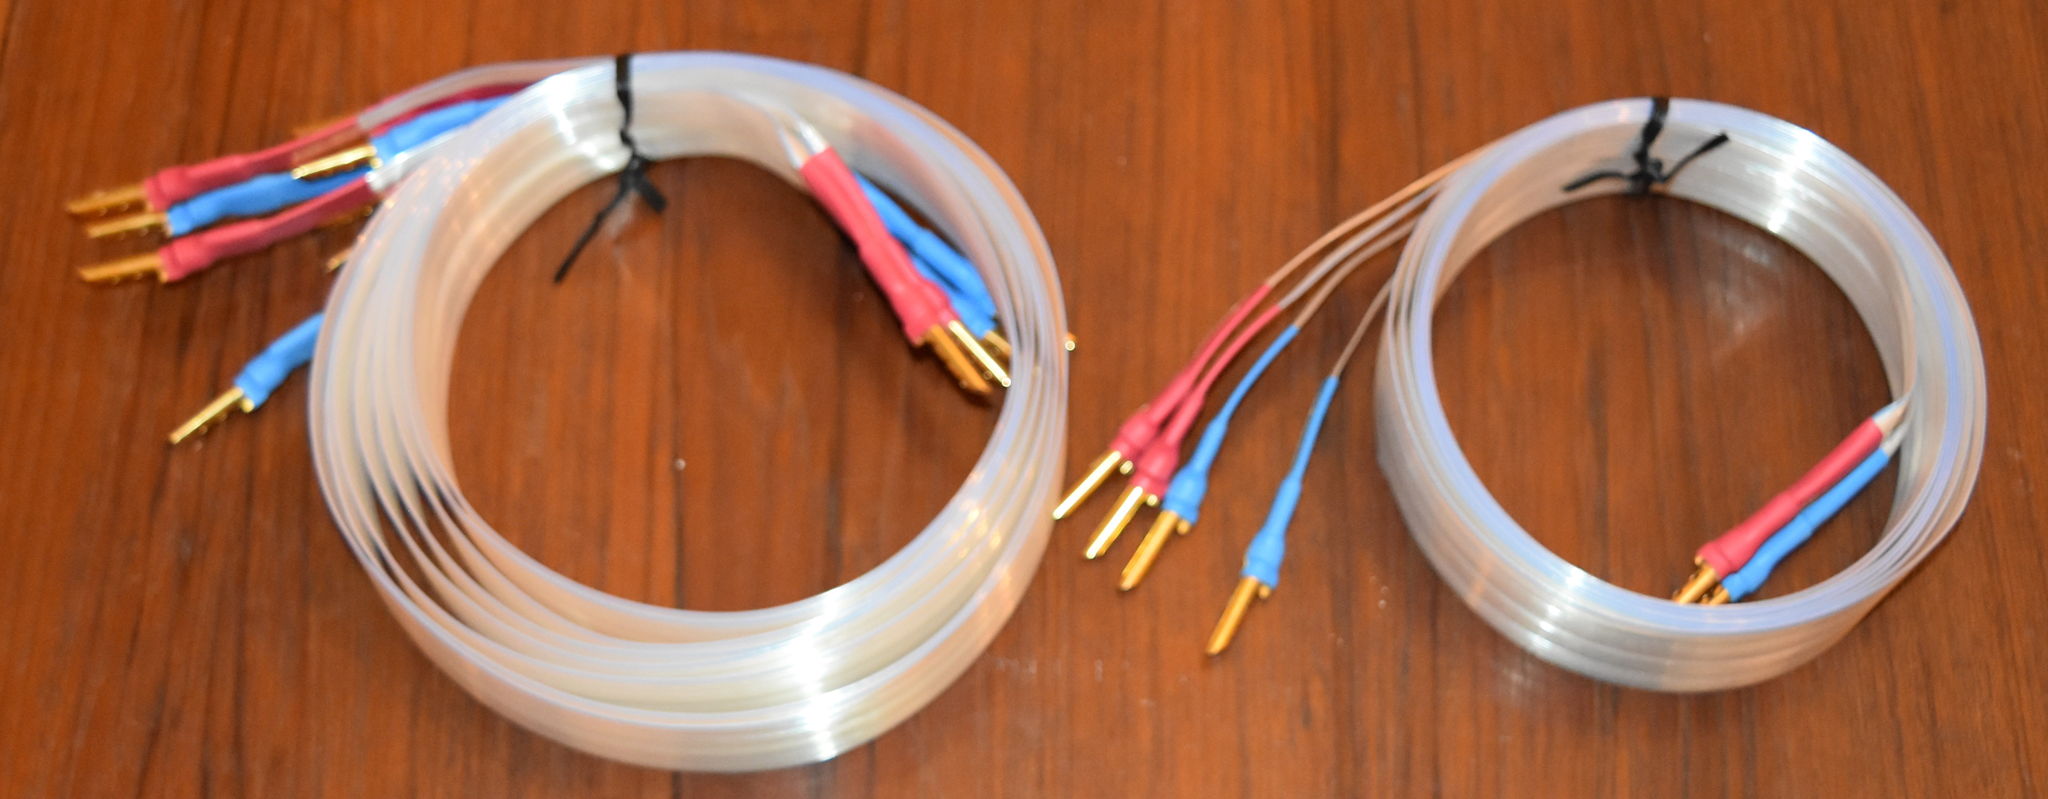 Nordost Blue Heaven Speakers cables for L/C/R speakers ... 6